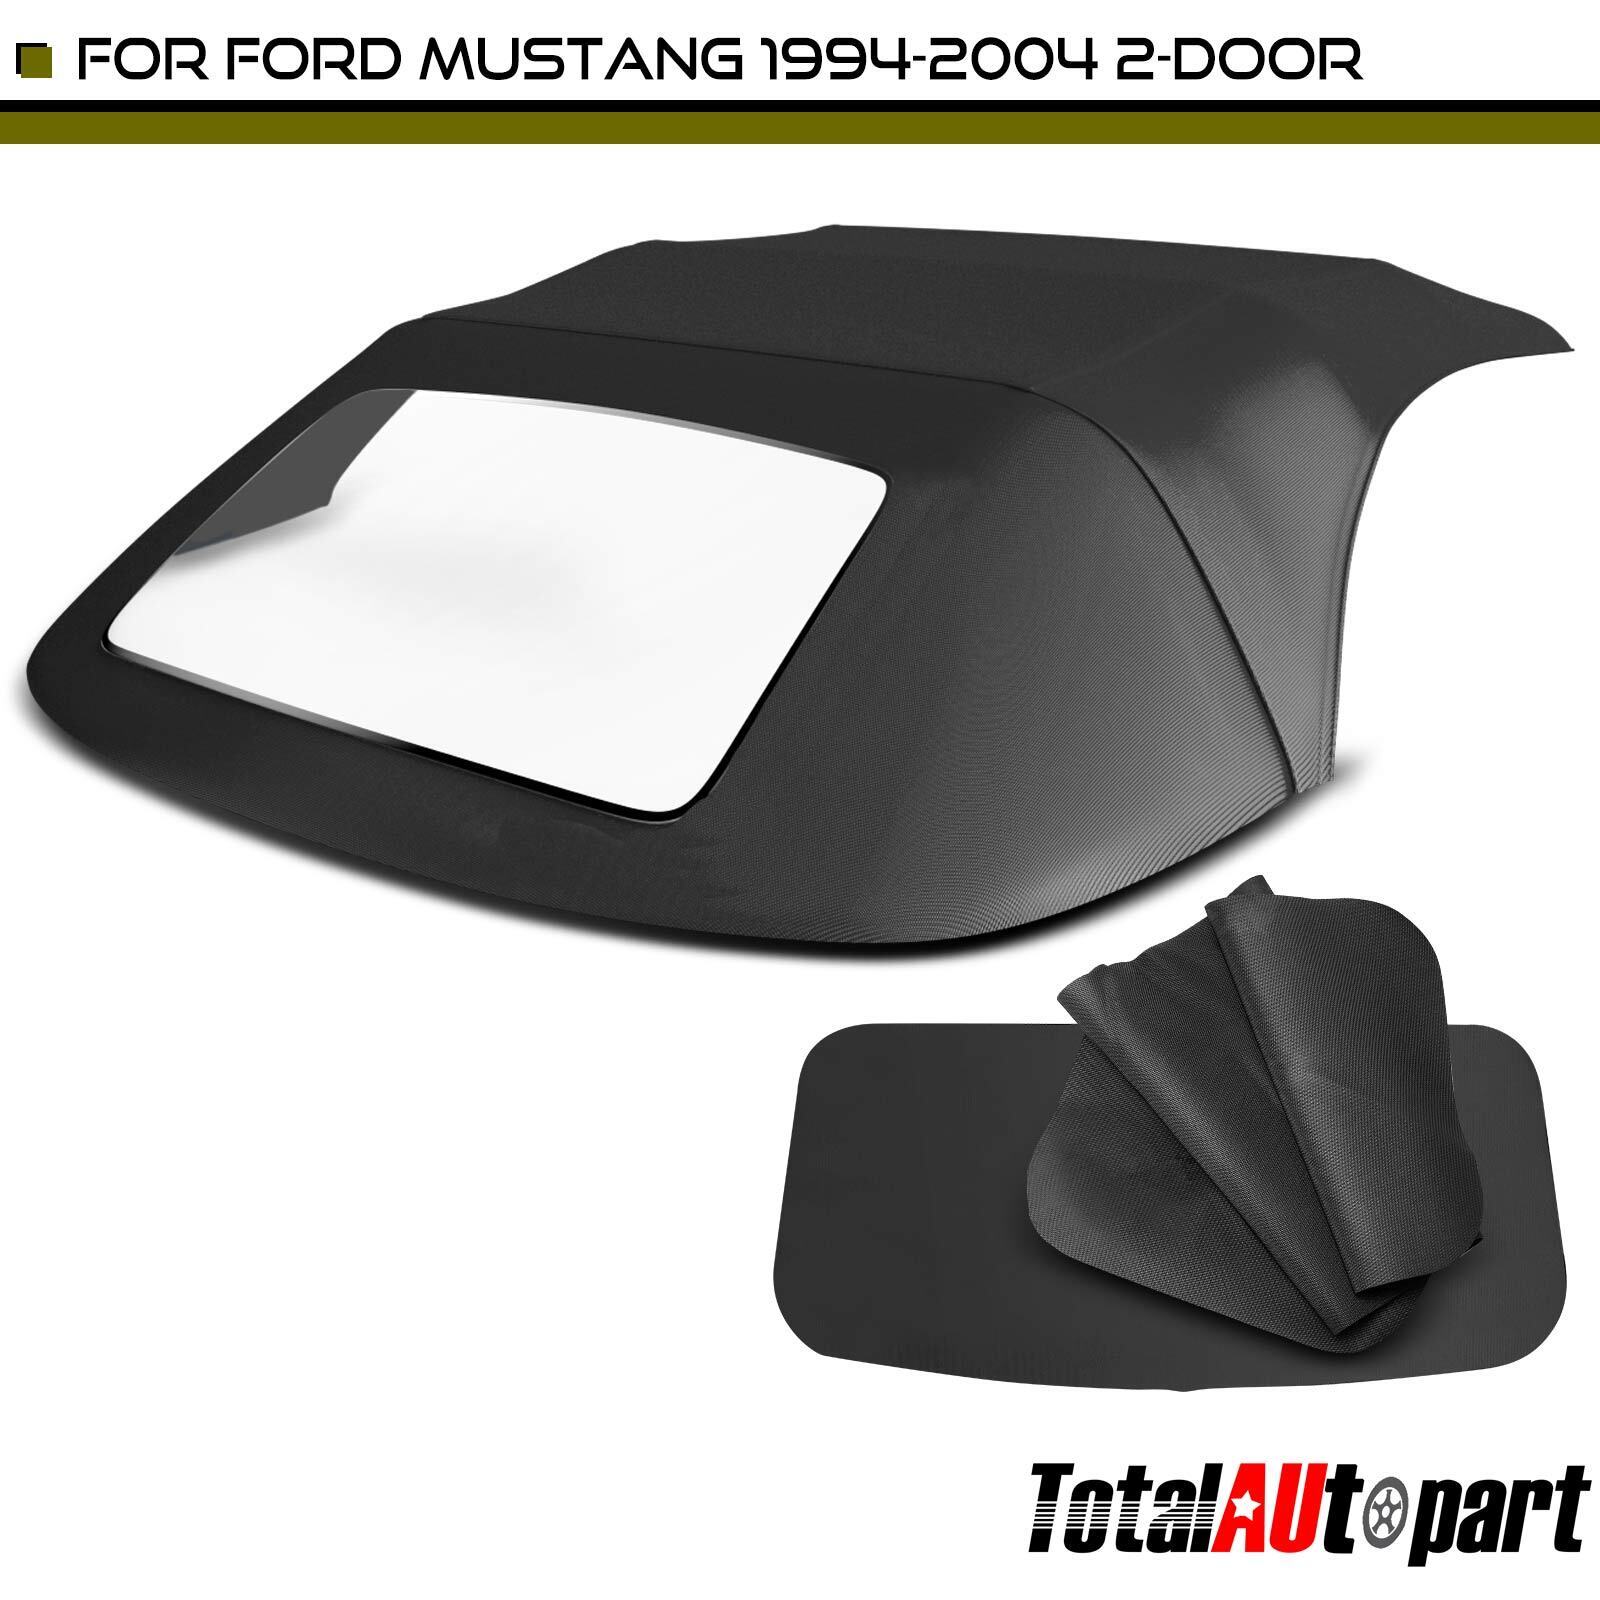 Convertible Soft Top w/Black Plastic Window for Ford Mustang 1994-2004 3.8L 4.6L